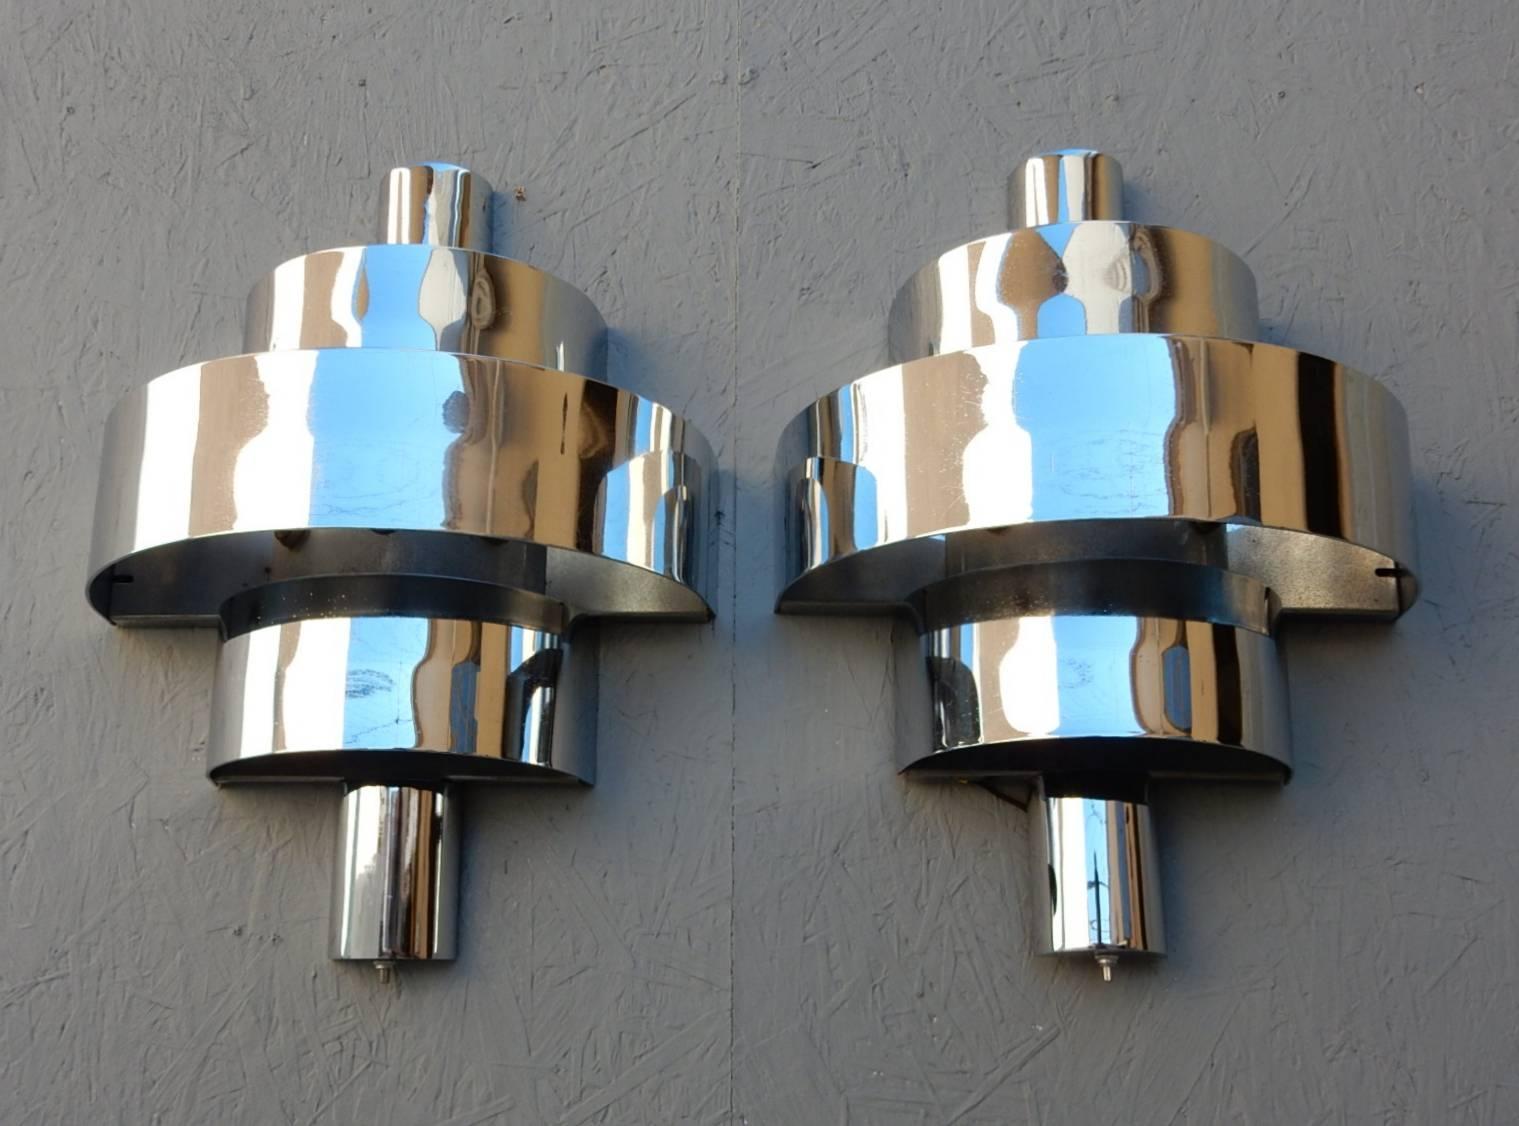 Fabulous pair of commercial size nickel-plated steel theatre wall sconces.
Large heavy wall lamps that take five candle size bulbs (three across centre and one on top and bottom). Off/on button switch on bottom.
(We have a 3rd matching sconce if